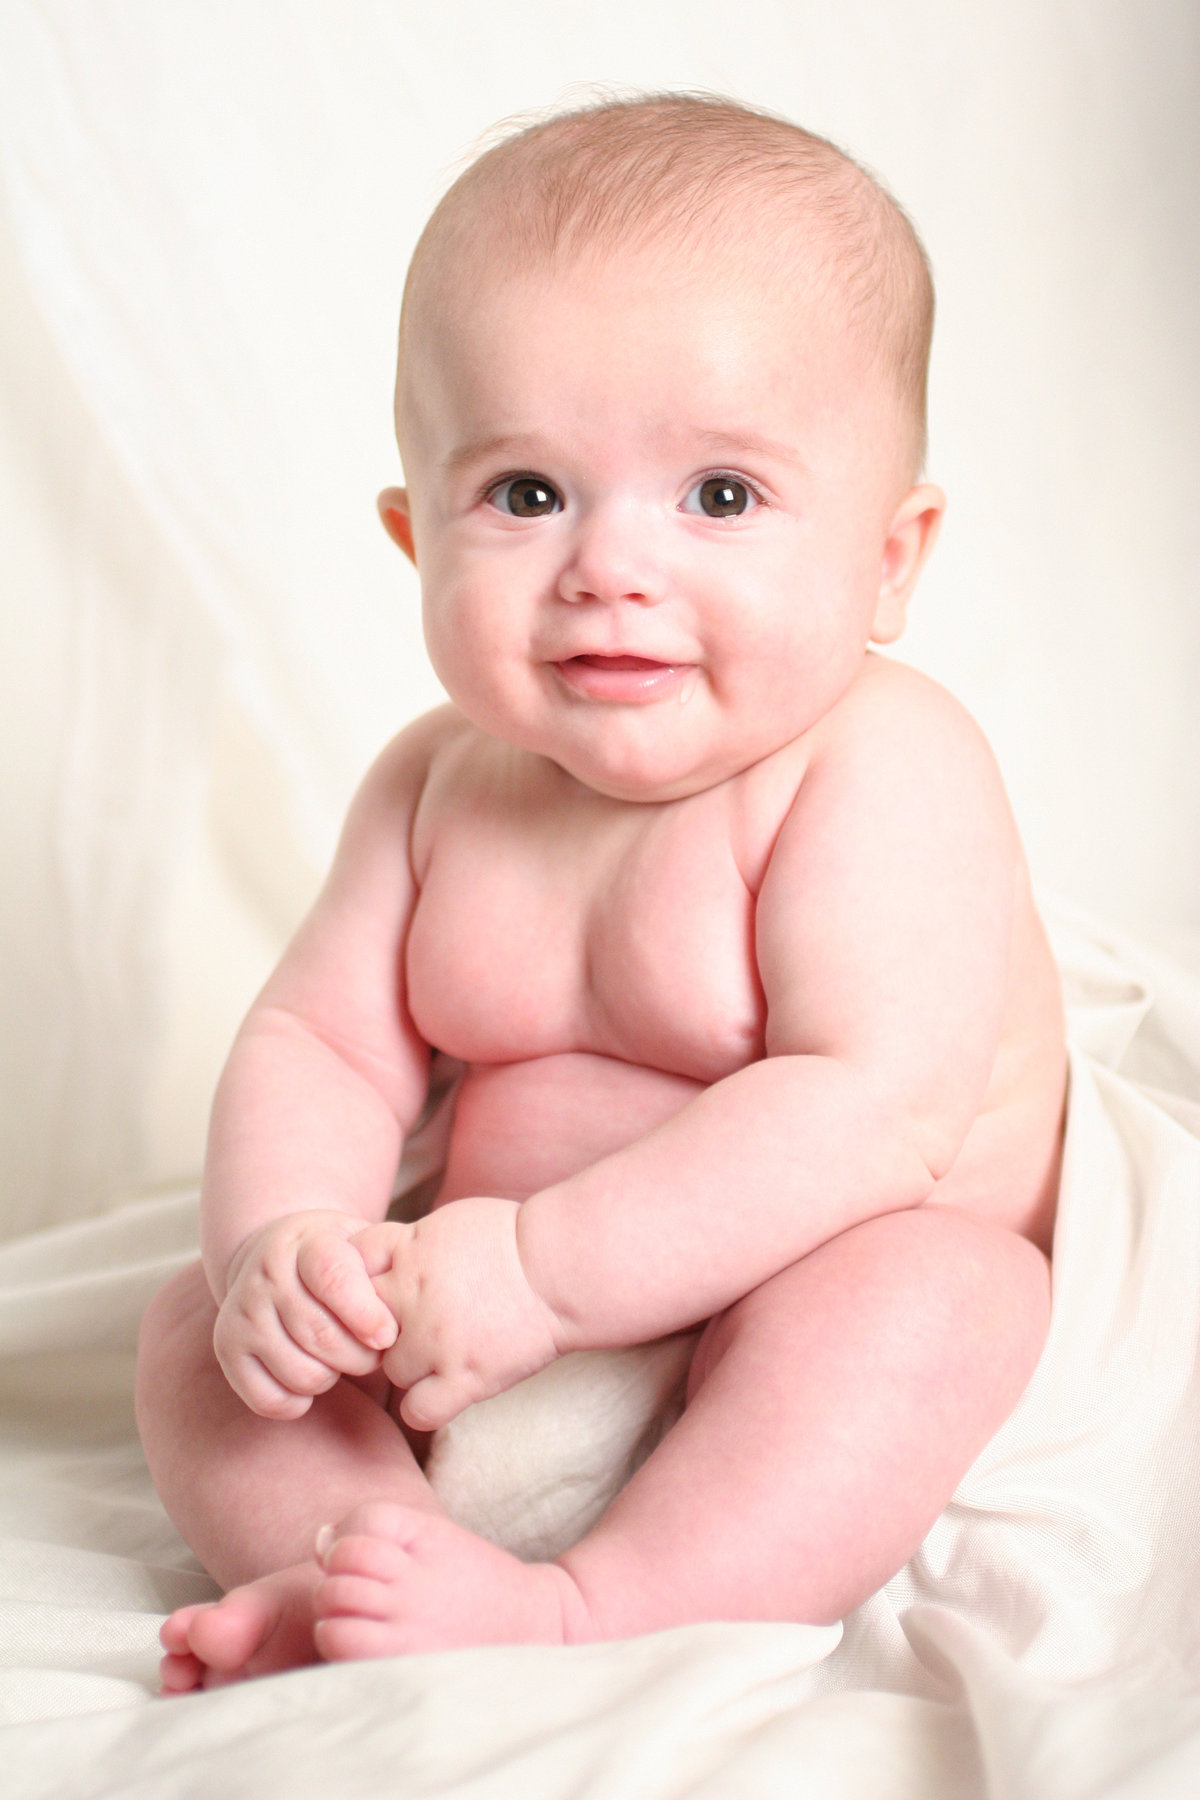 Want some great shots of your cute baby?